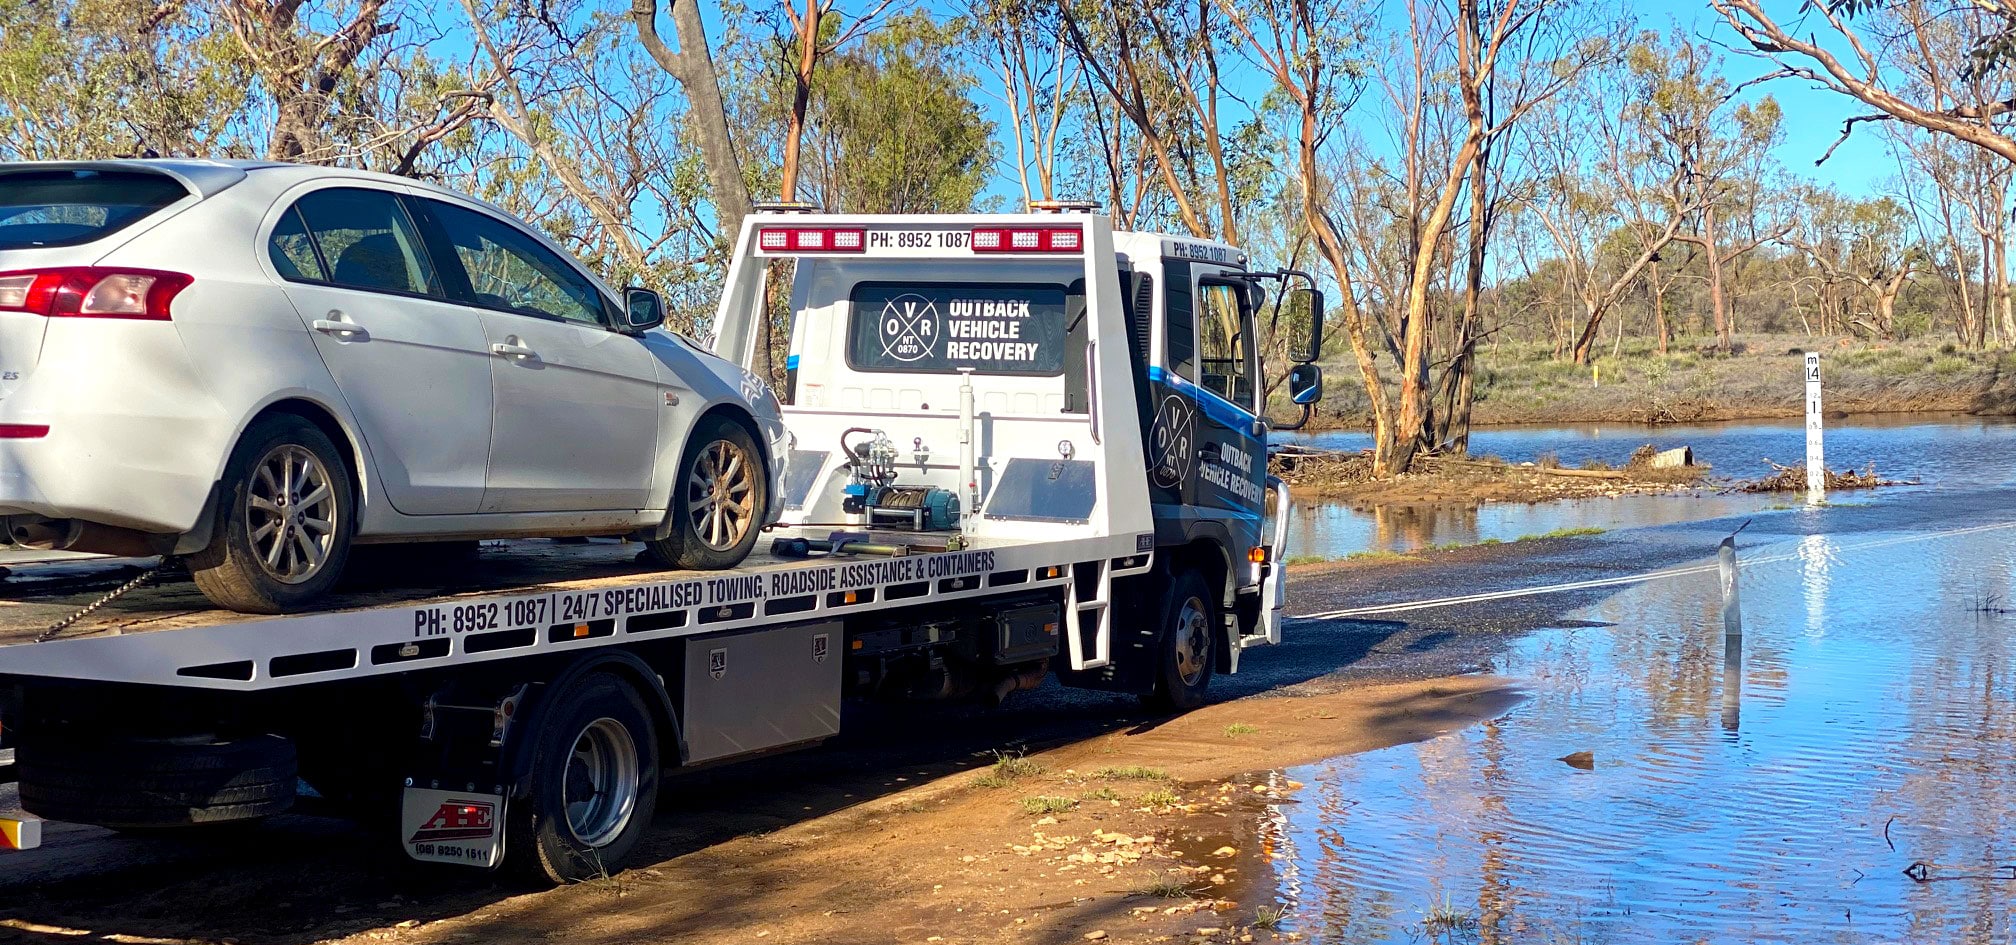 Towing white car - Outback Vehicle Recovery Alice Springs